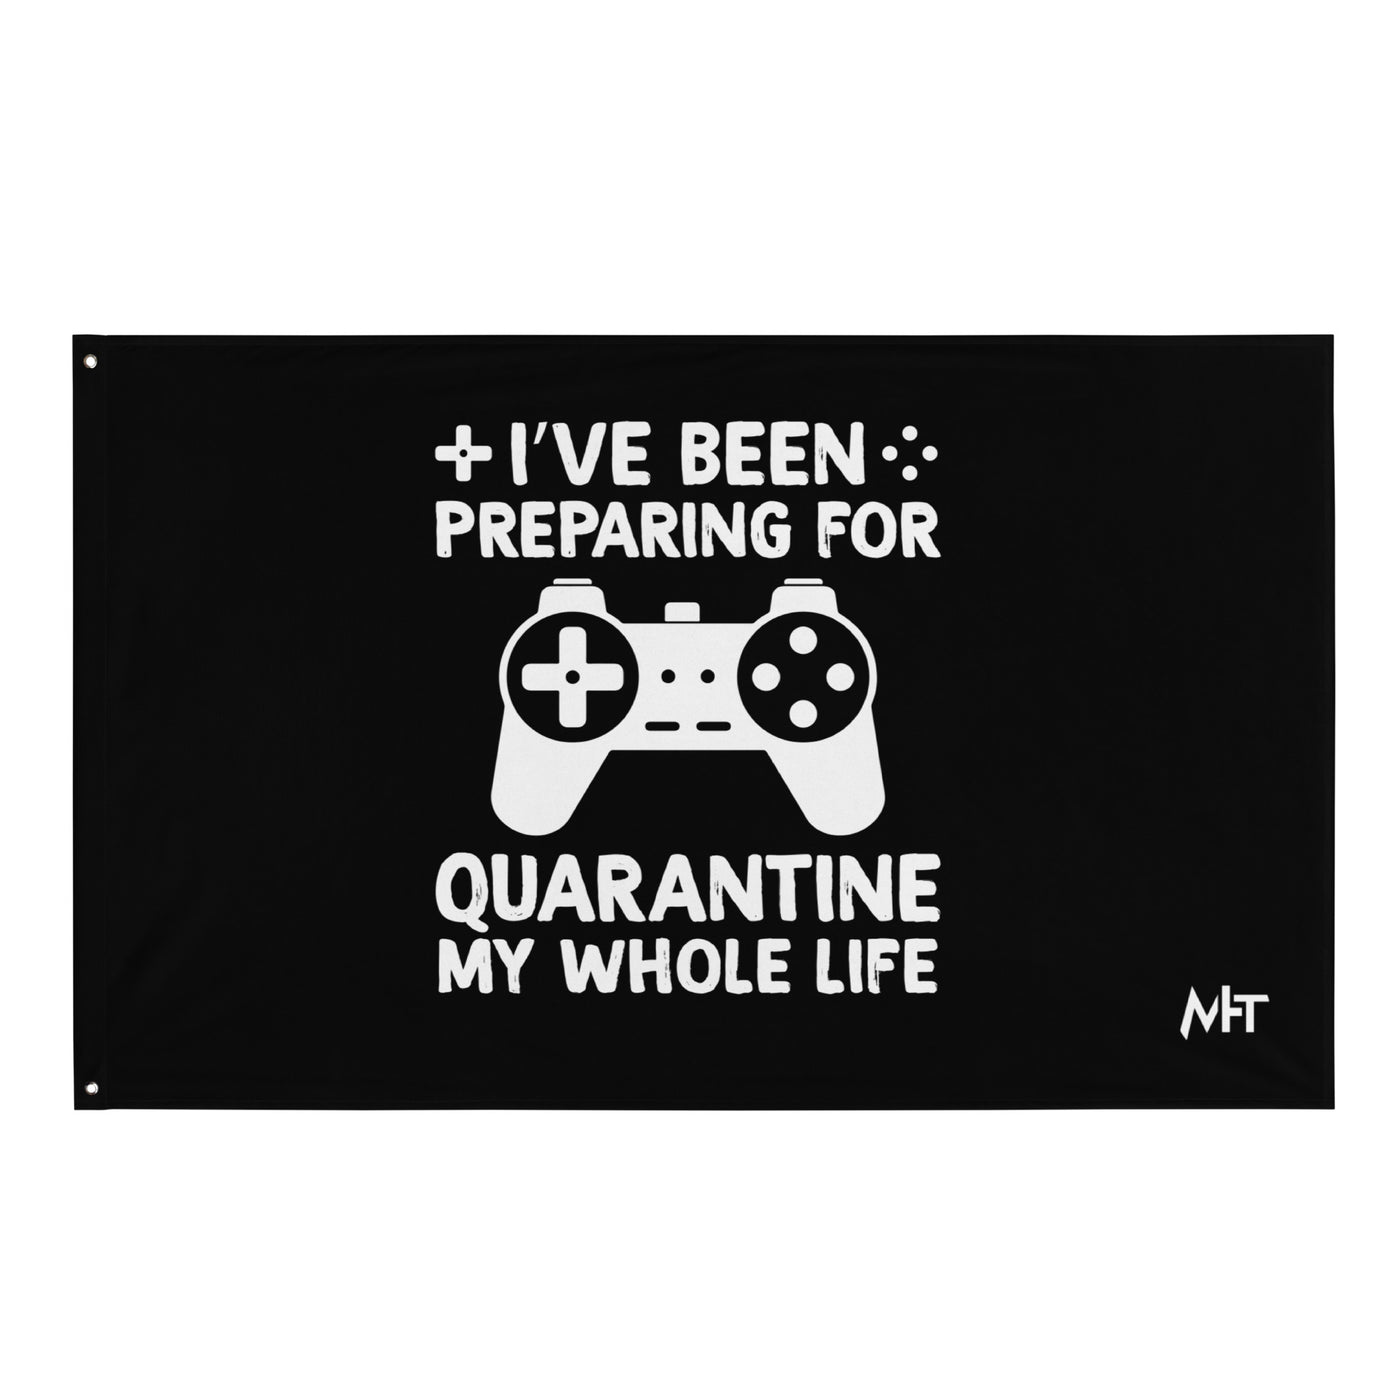 I have been preparing my Quarantine for my whole life - Flag